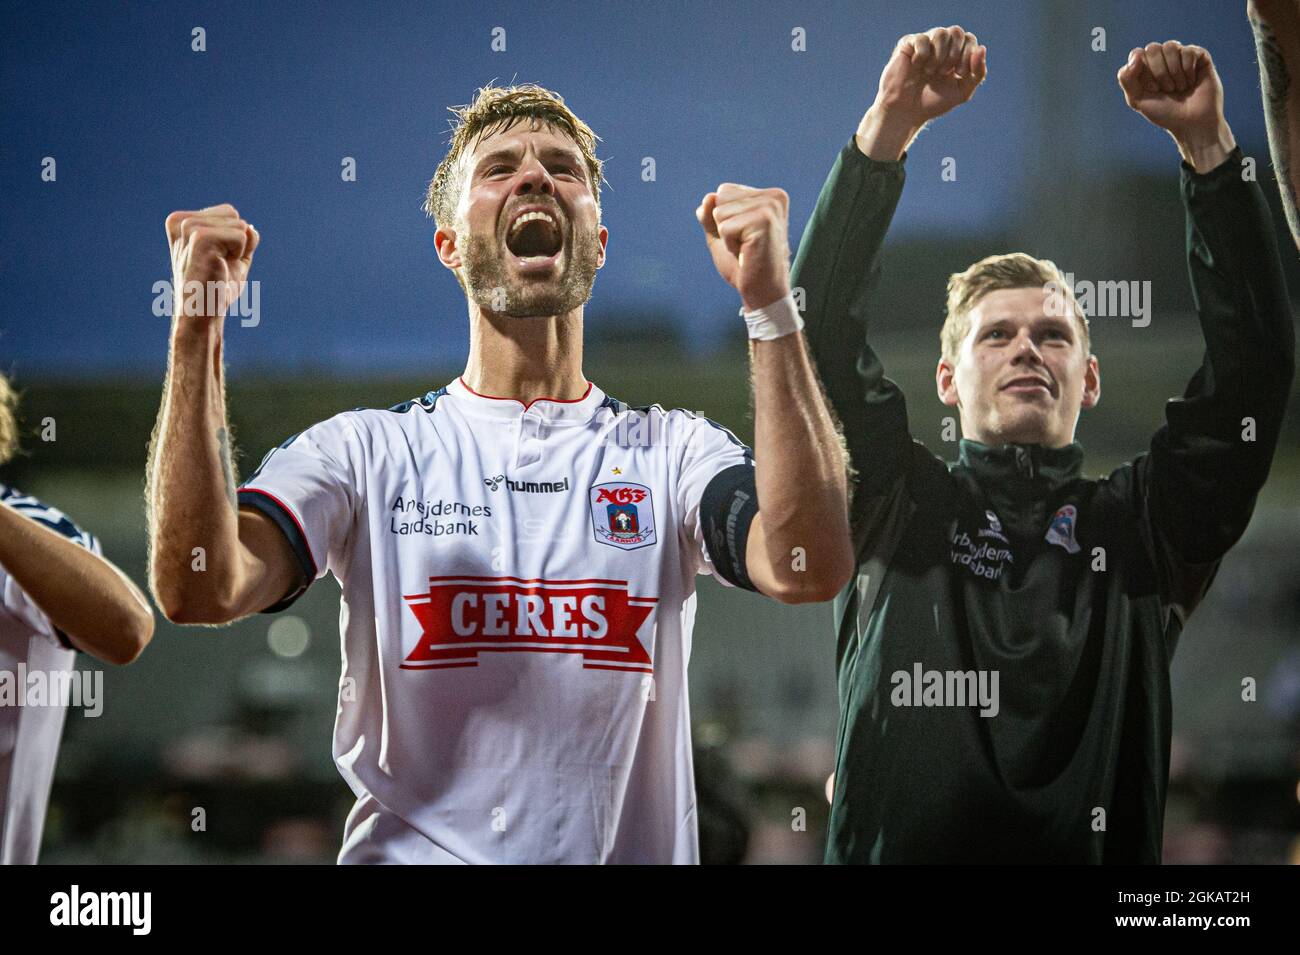 Aarhus, Denmark. 12th, September 2021. Patrick Mortensen (9) of AGF is celebrating the victory with the fans after the 3F Superliga match between Aarhus GF and Vejle Boldklub at Ceres Park in Aarhus. (Photo credit: Gonzales Photo - Morten Kjaer). Stock Photo